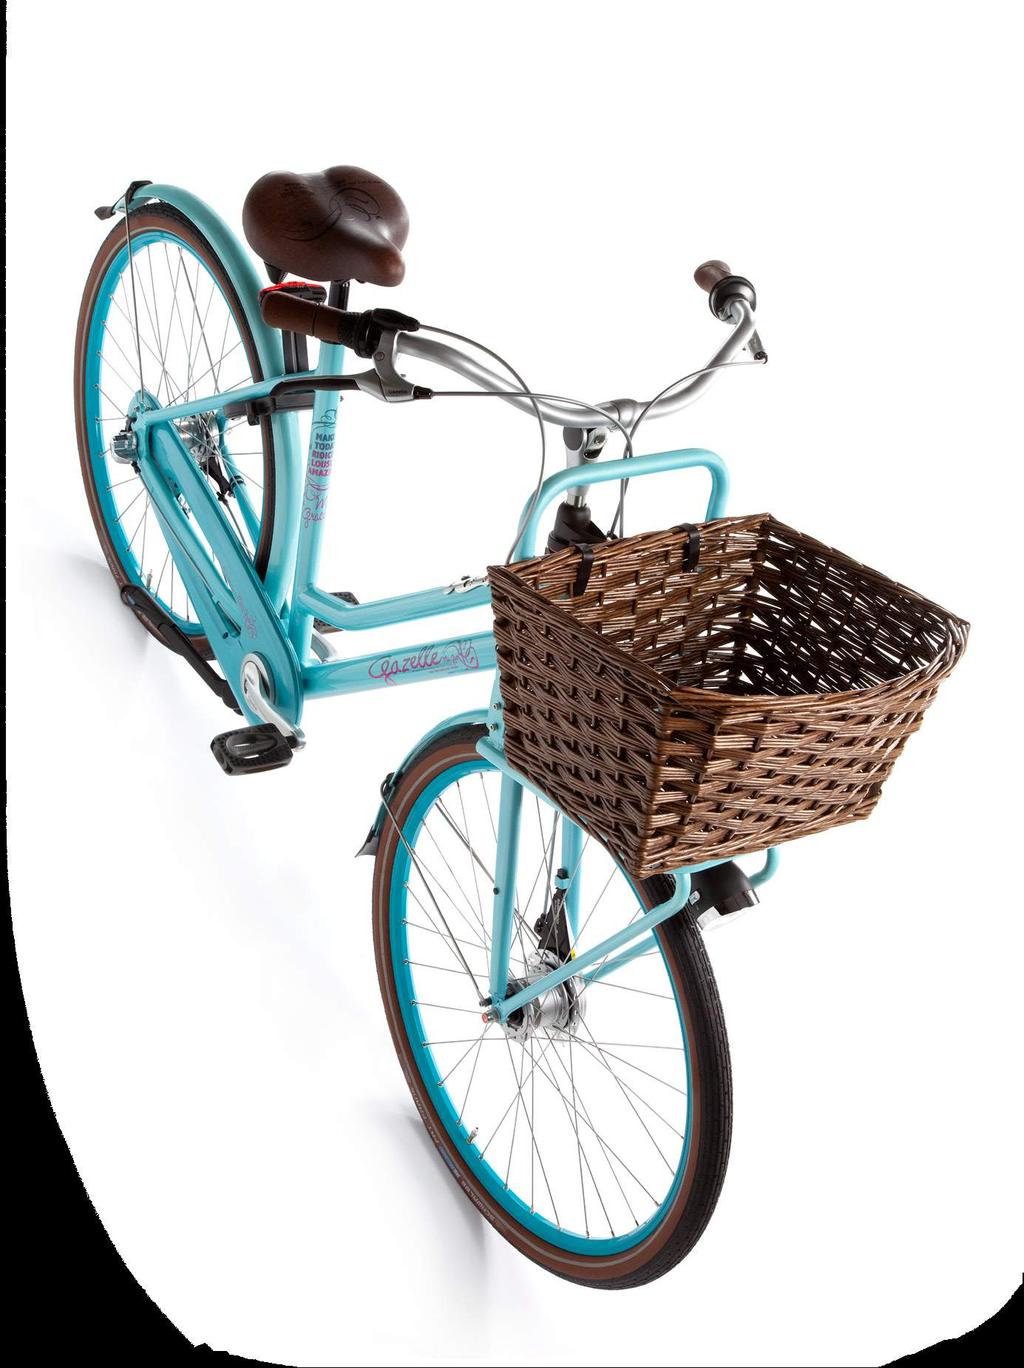 28 29 MISS GRACE Lifestyle bikes This delivery bike lives